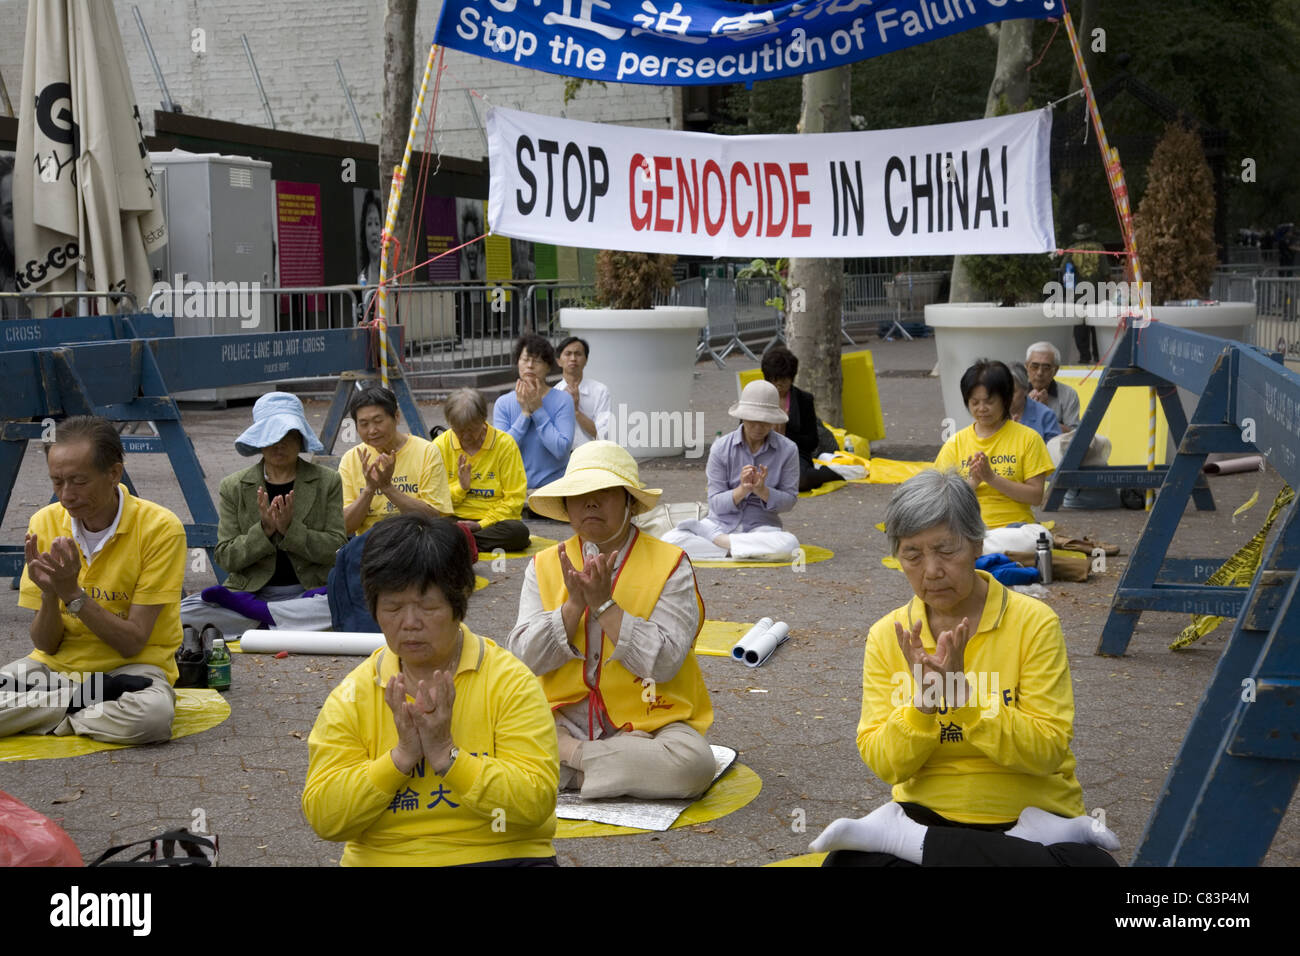 Devotees of Falun Gong demonstrate against the Chinese Gov's treatment of their group in China. Stock Photo